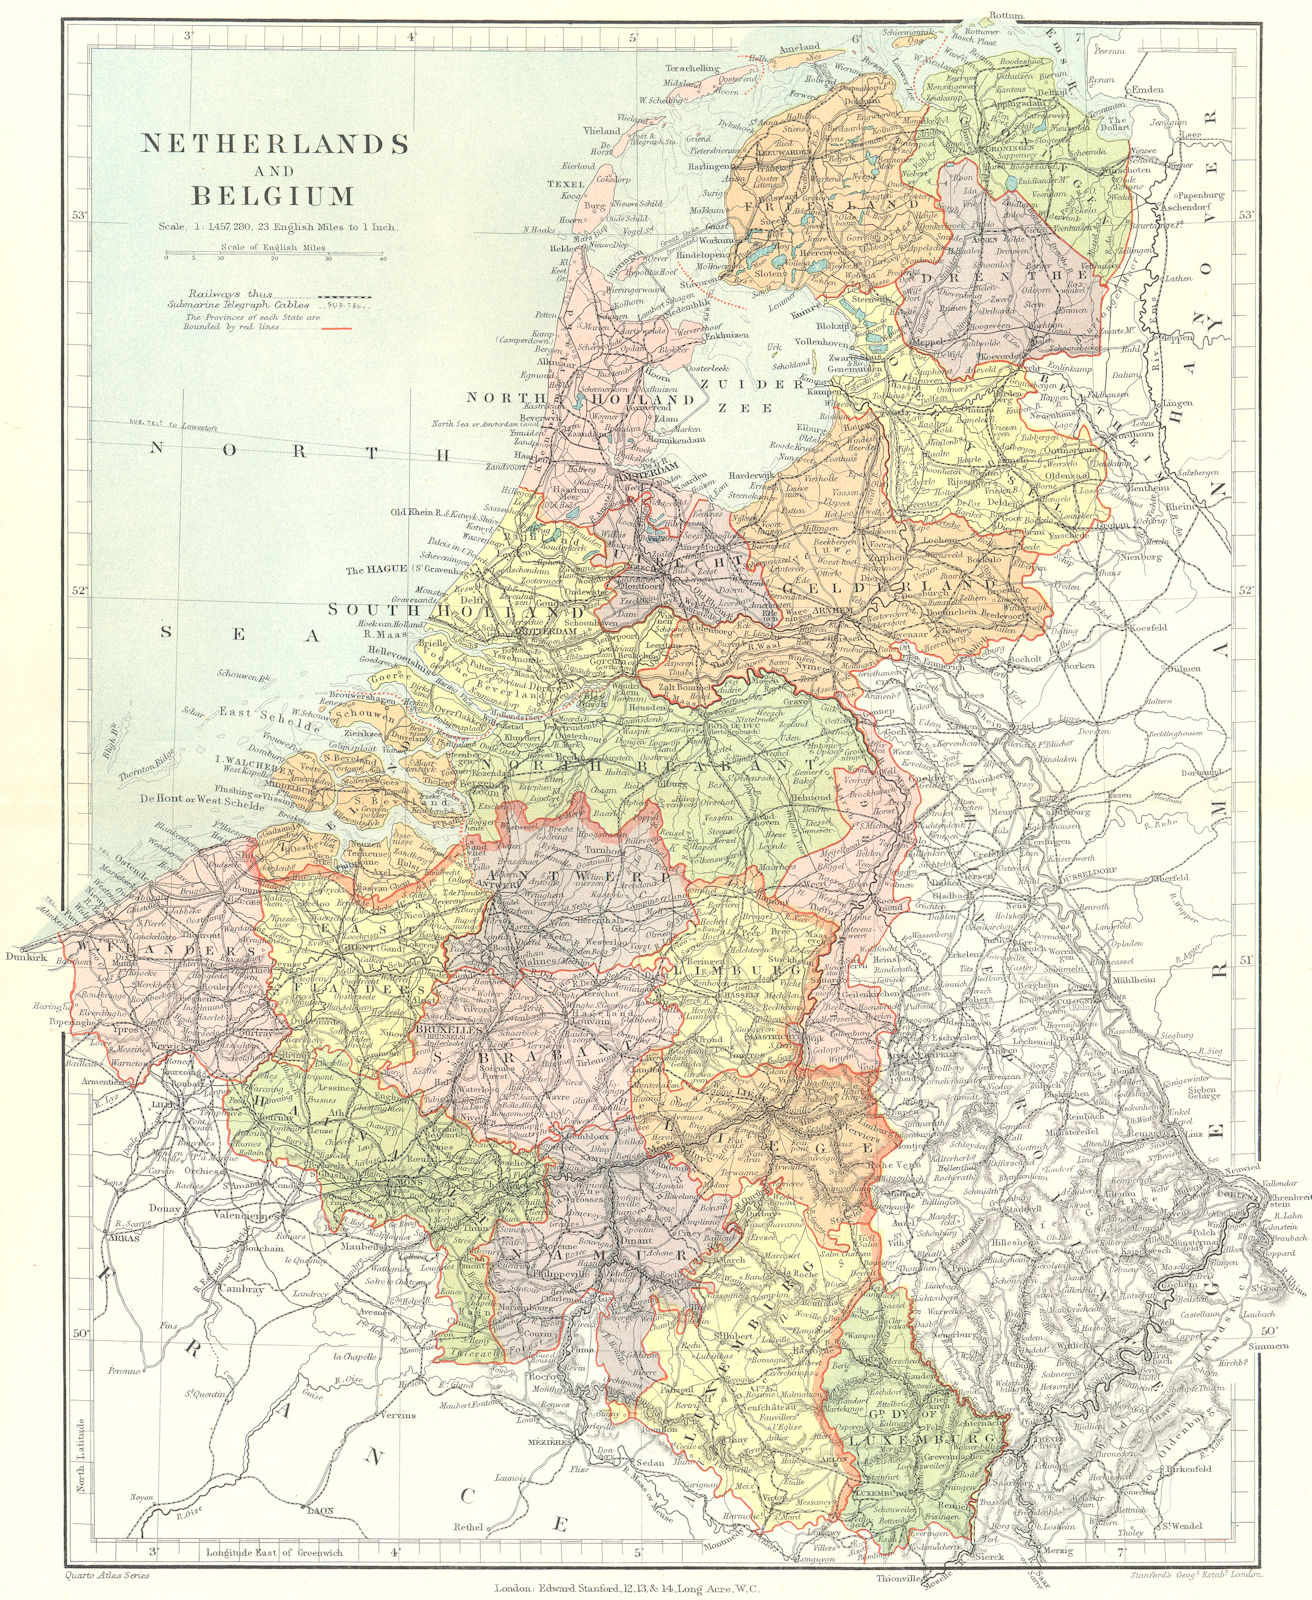 Associate Product BENELUX. Netherlands, Belgium & Luxembourg showing provinces. STANFORD 1906 map